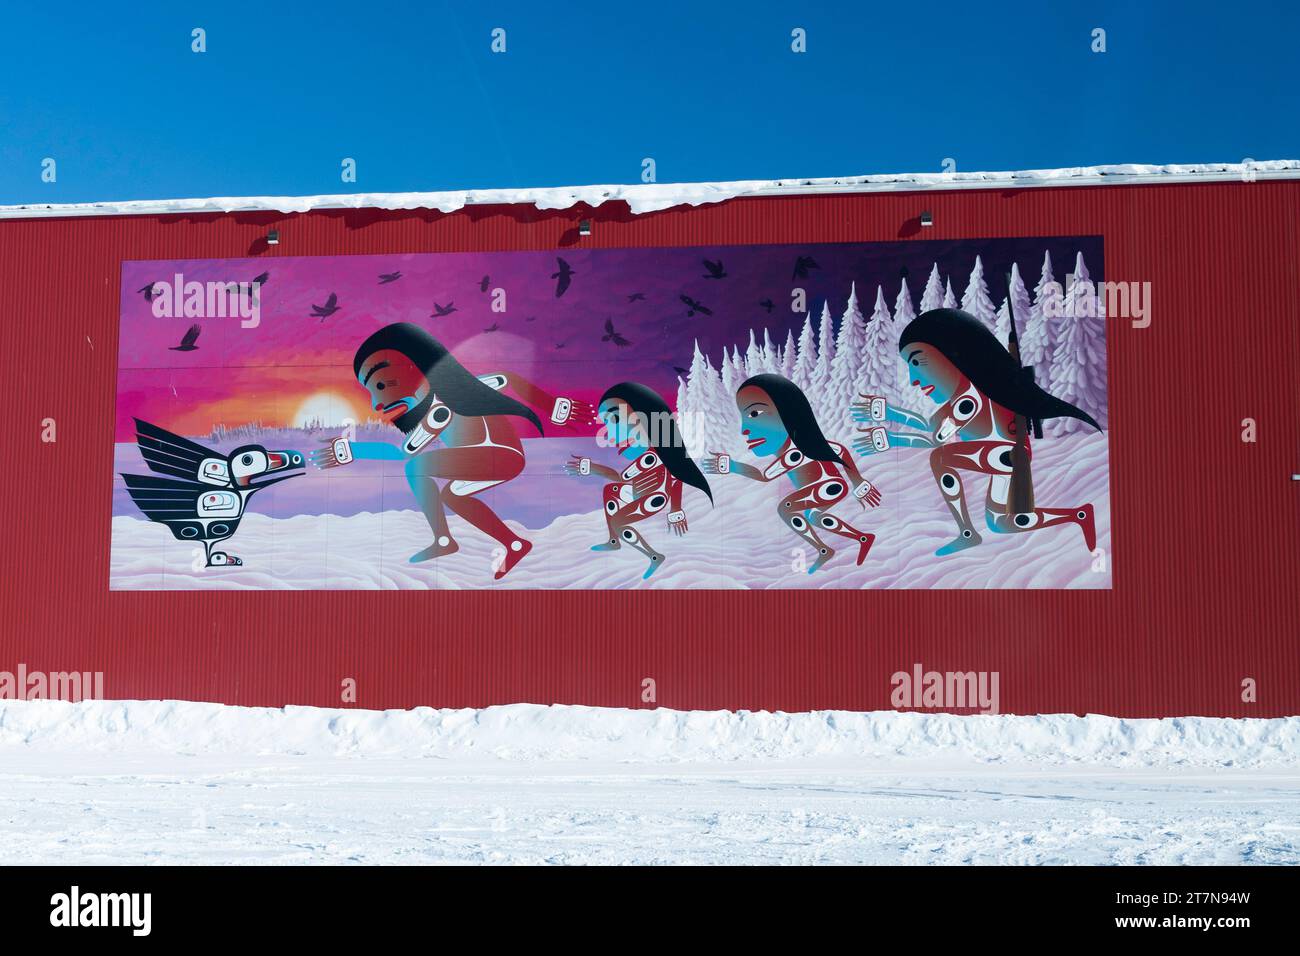 Mural on red pole barn building of native women in tribal geometric designs approaching a black raven on a winter day, Yellowknife, Northwest Territor Stock Photo